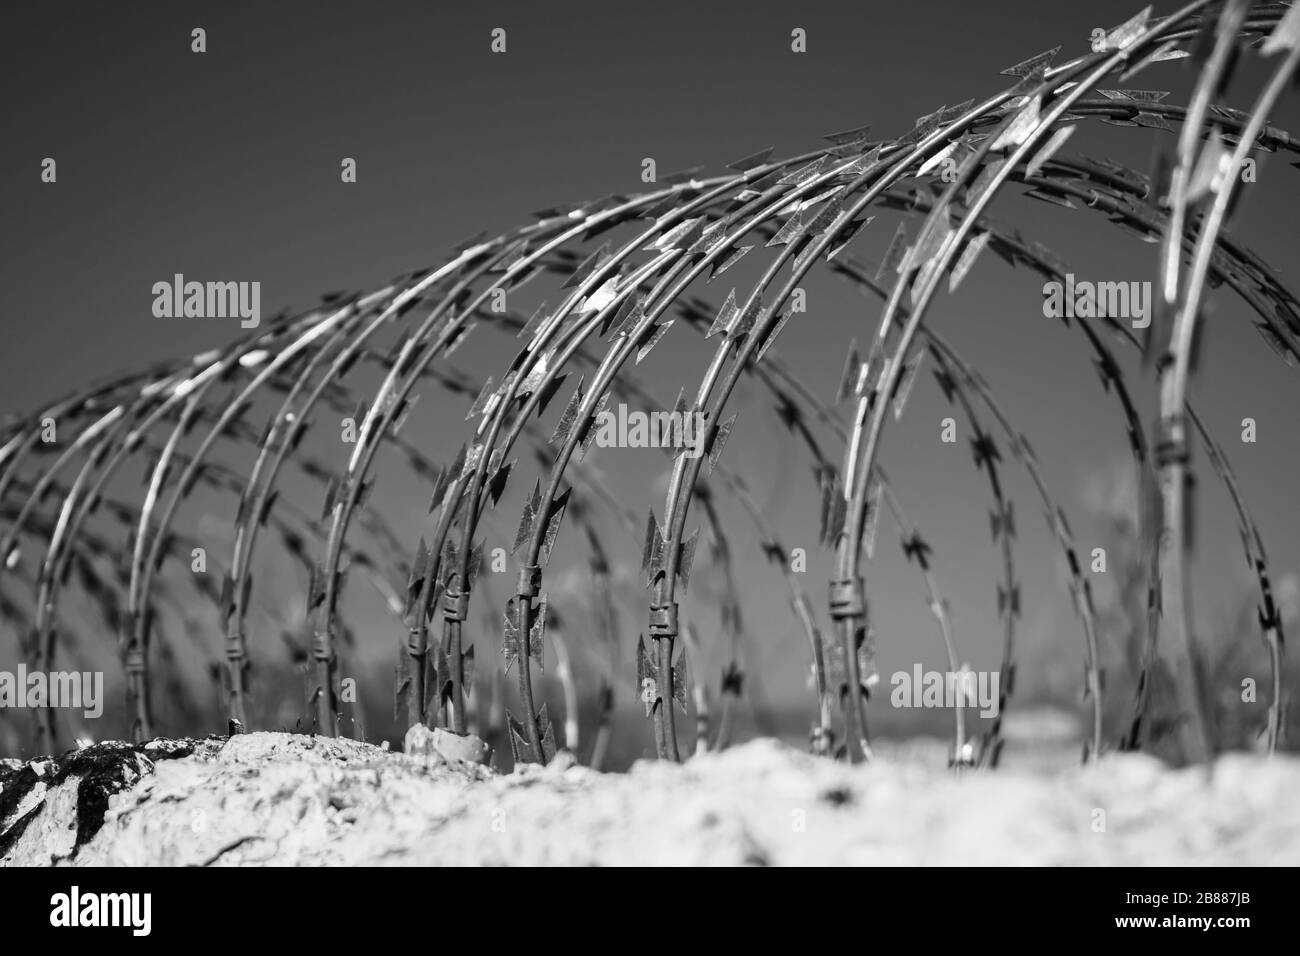 Barb and razor steel wire fence on top of wall, selective focus, black and white Stock Photo